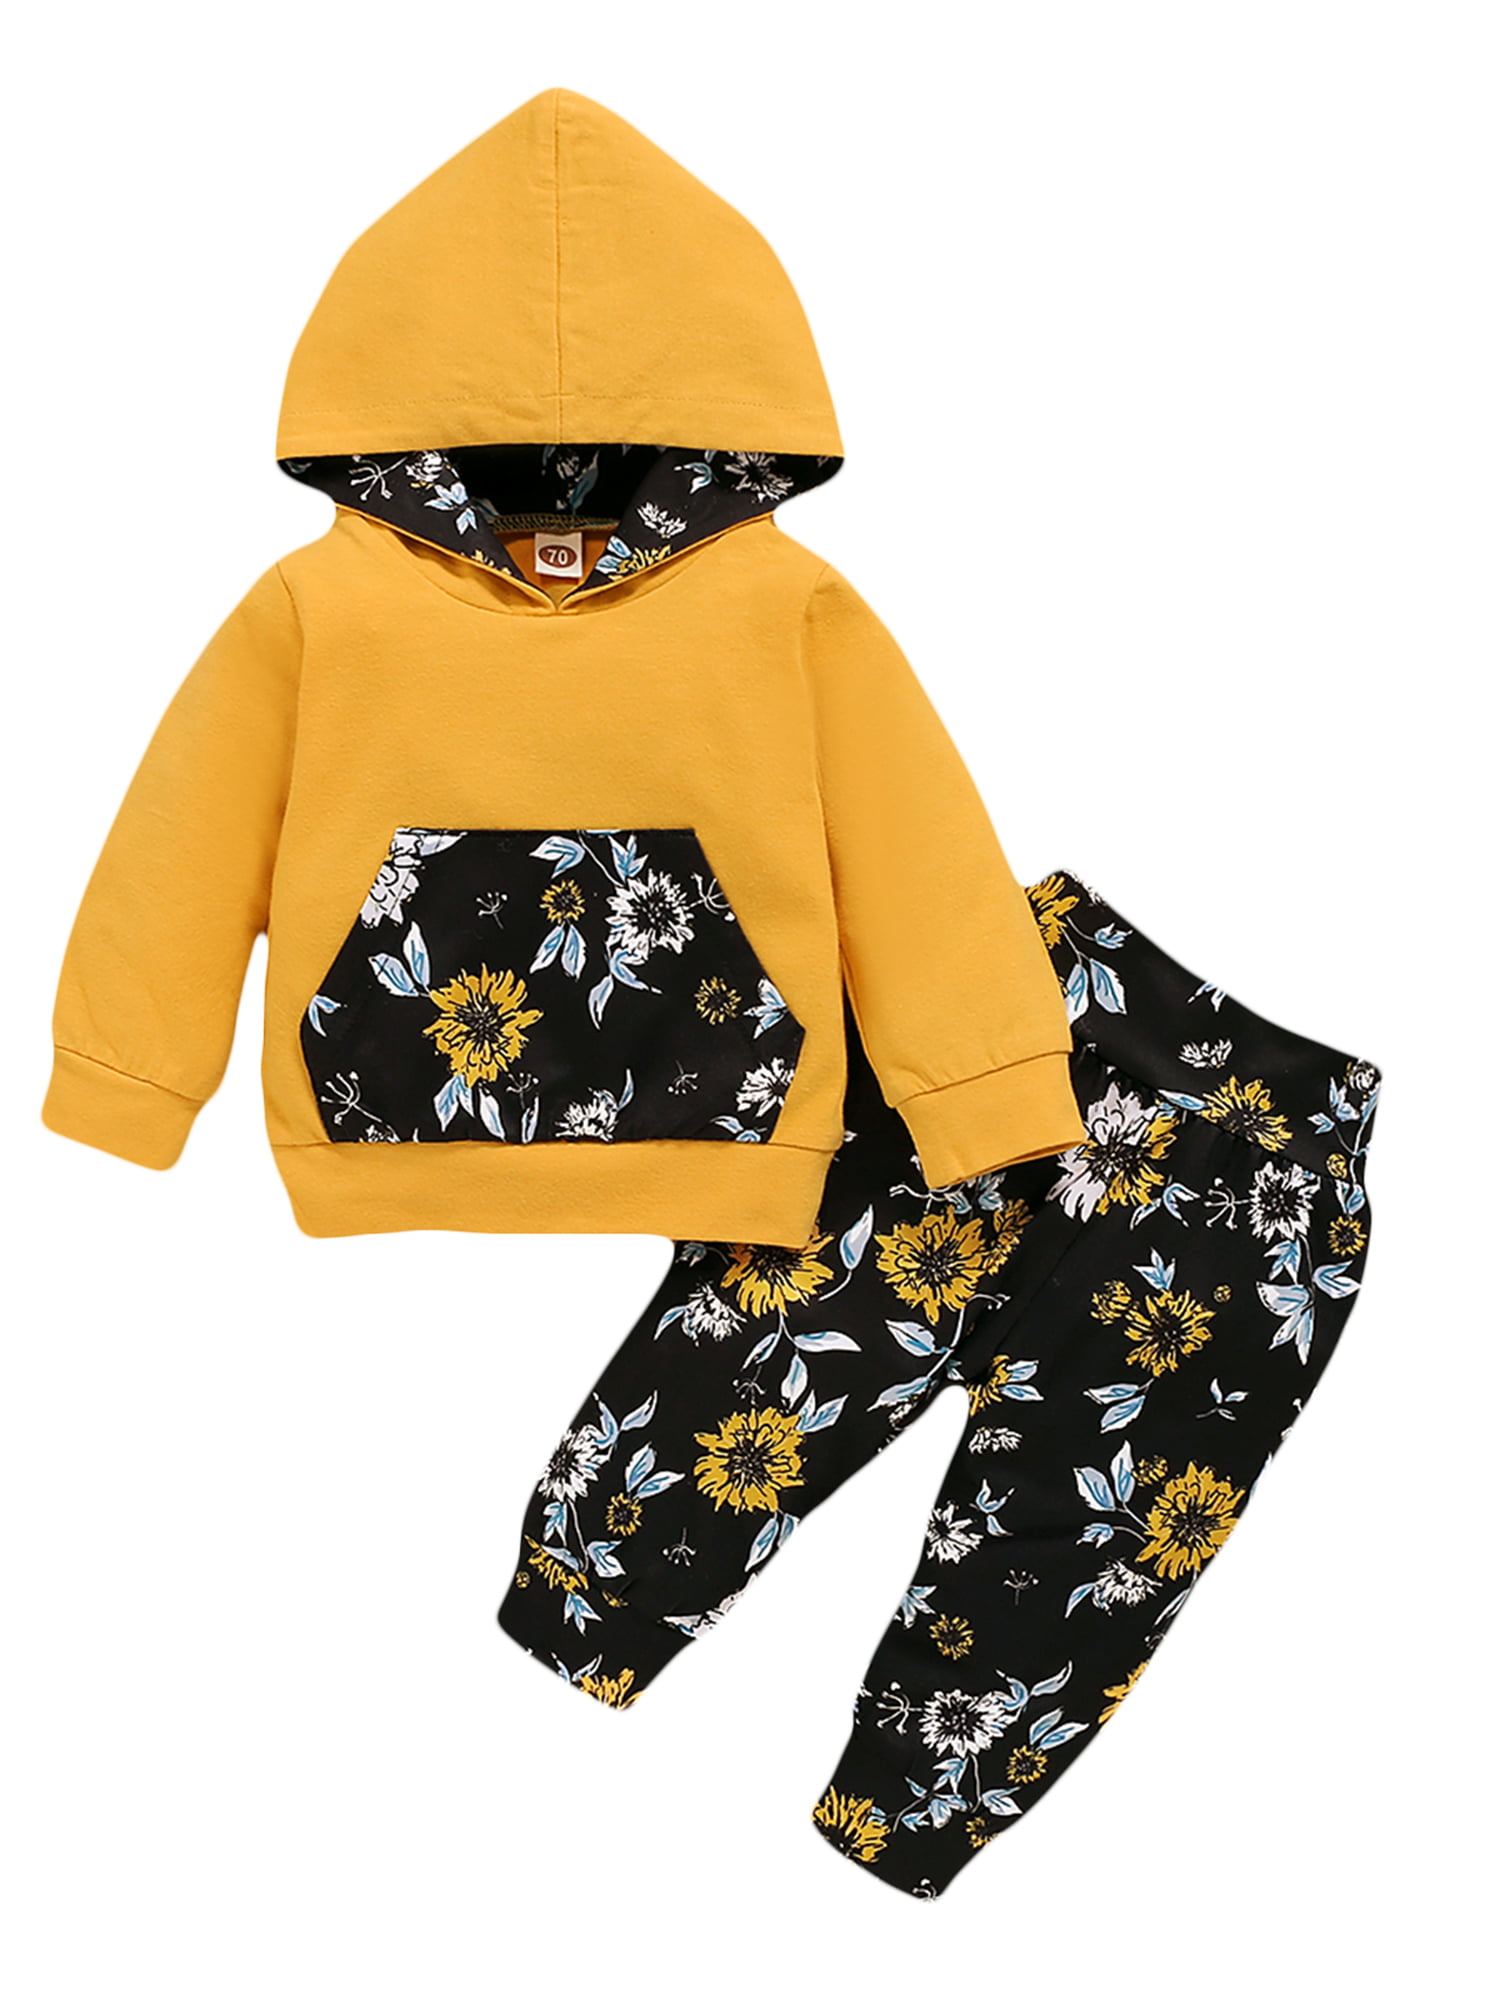 2pcs Toddler Kids Boys Girls Hooded Tops+Pants Outfits Unisex Warm Baby Clothes 